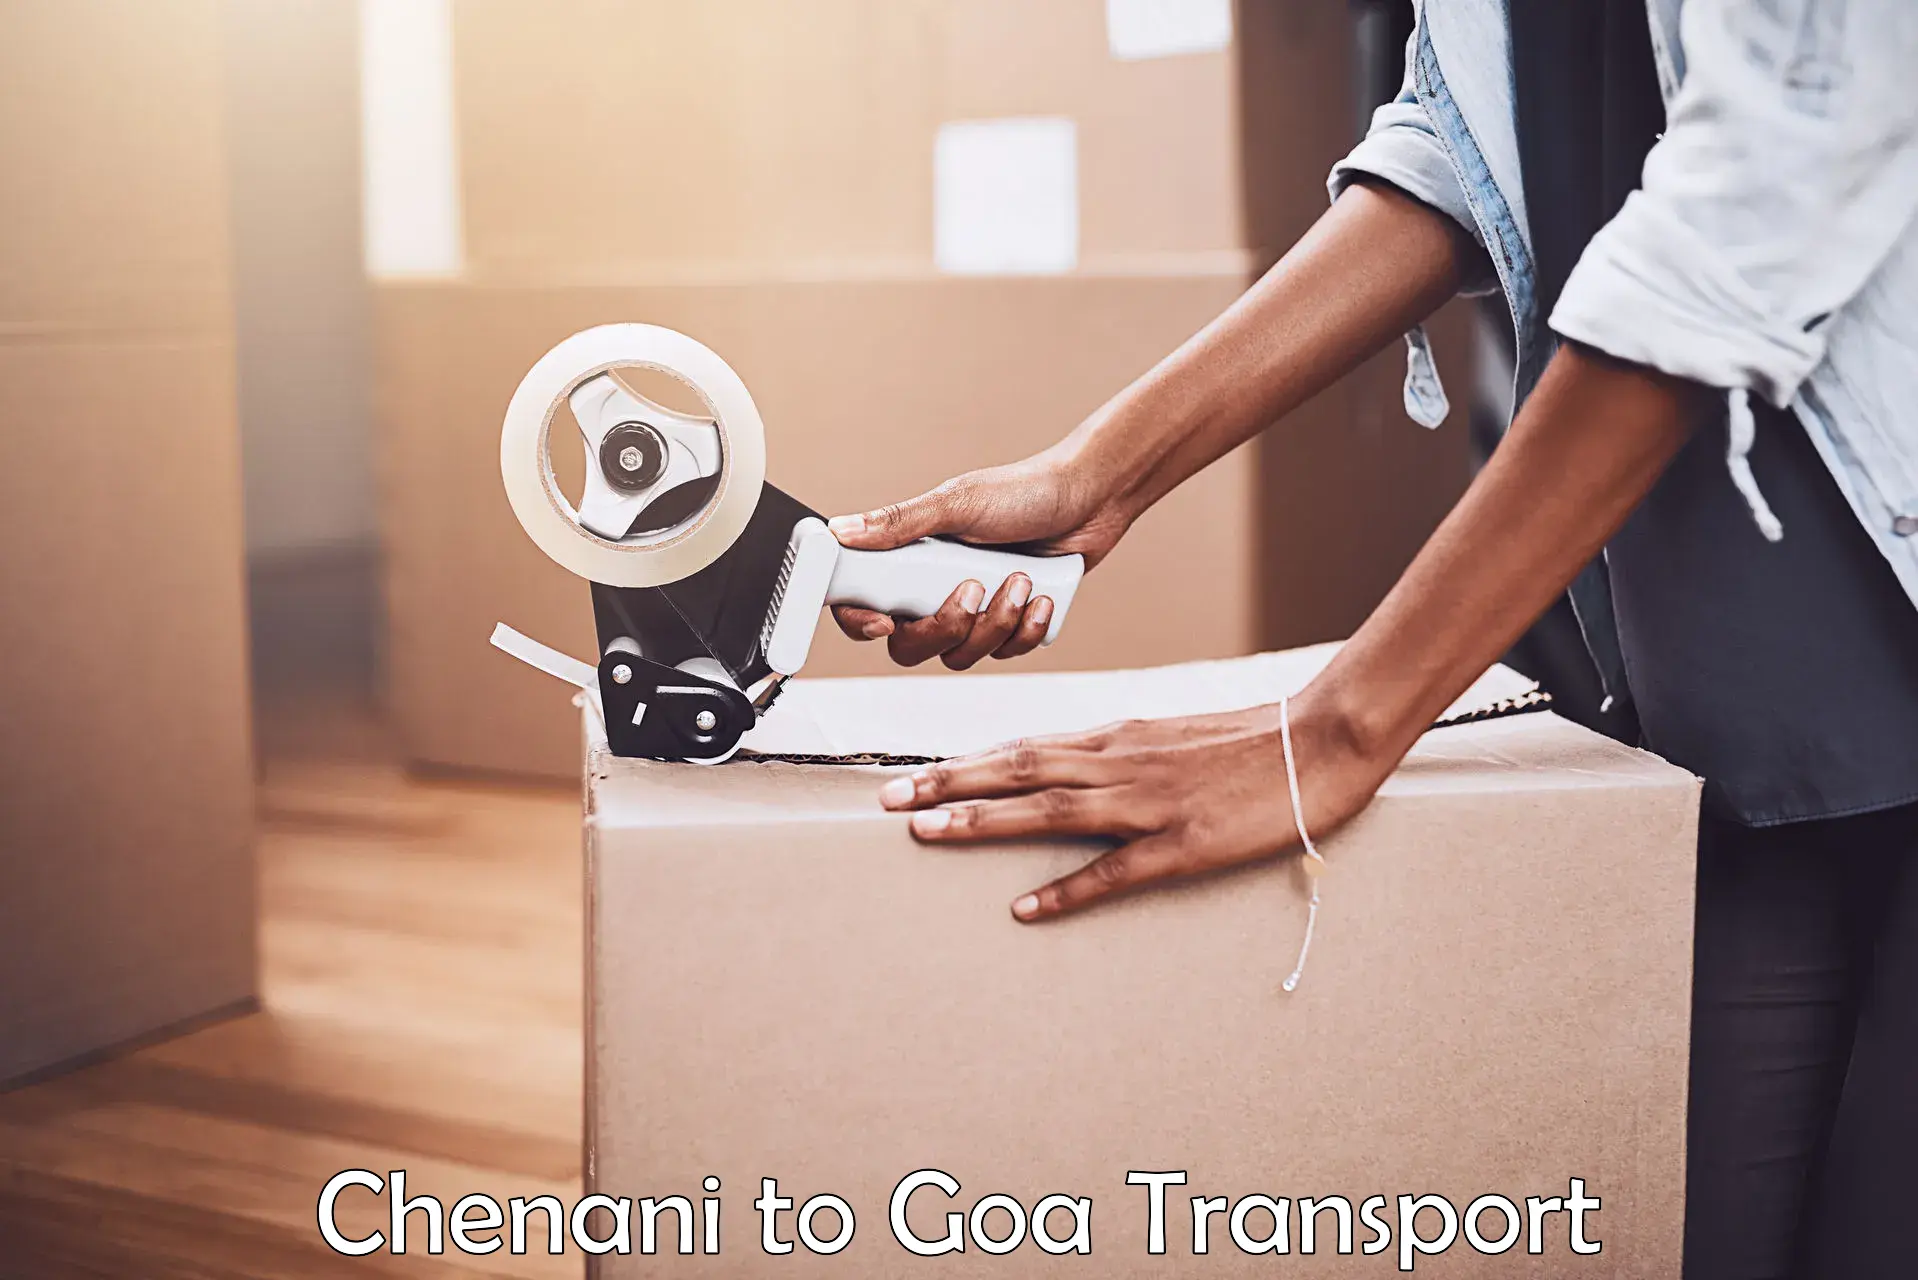 Transport in sharing Chenani to Goa